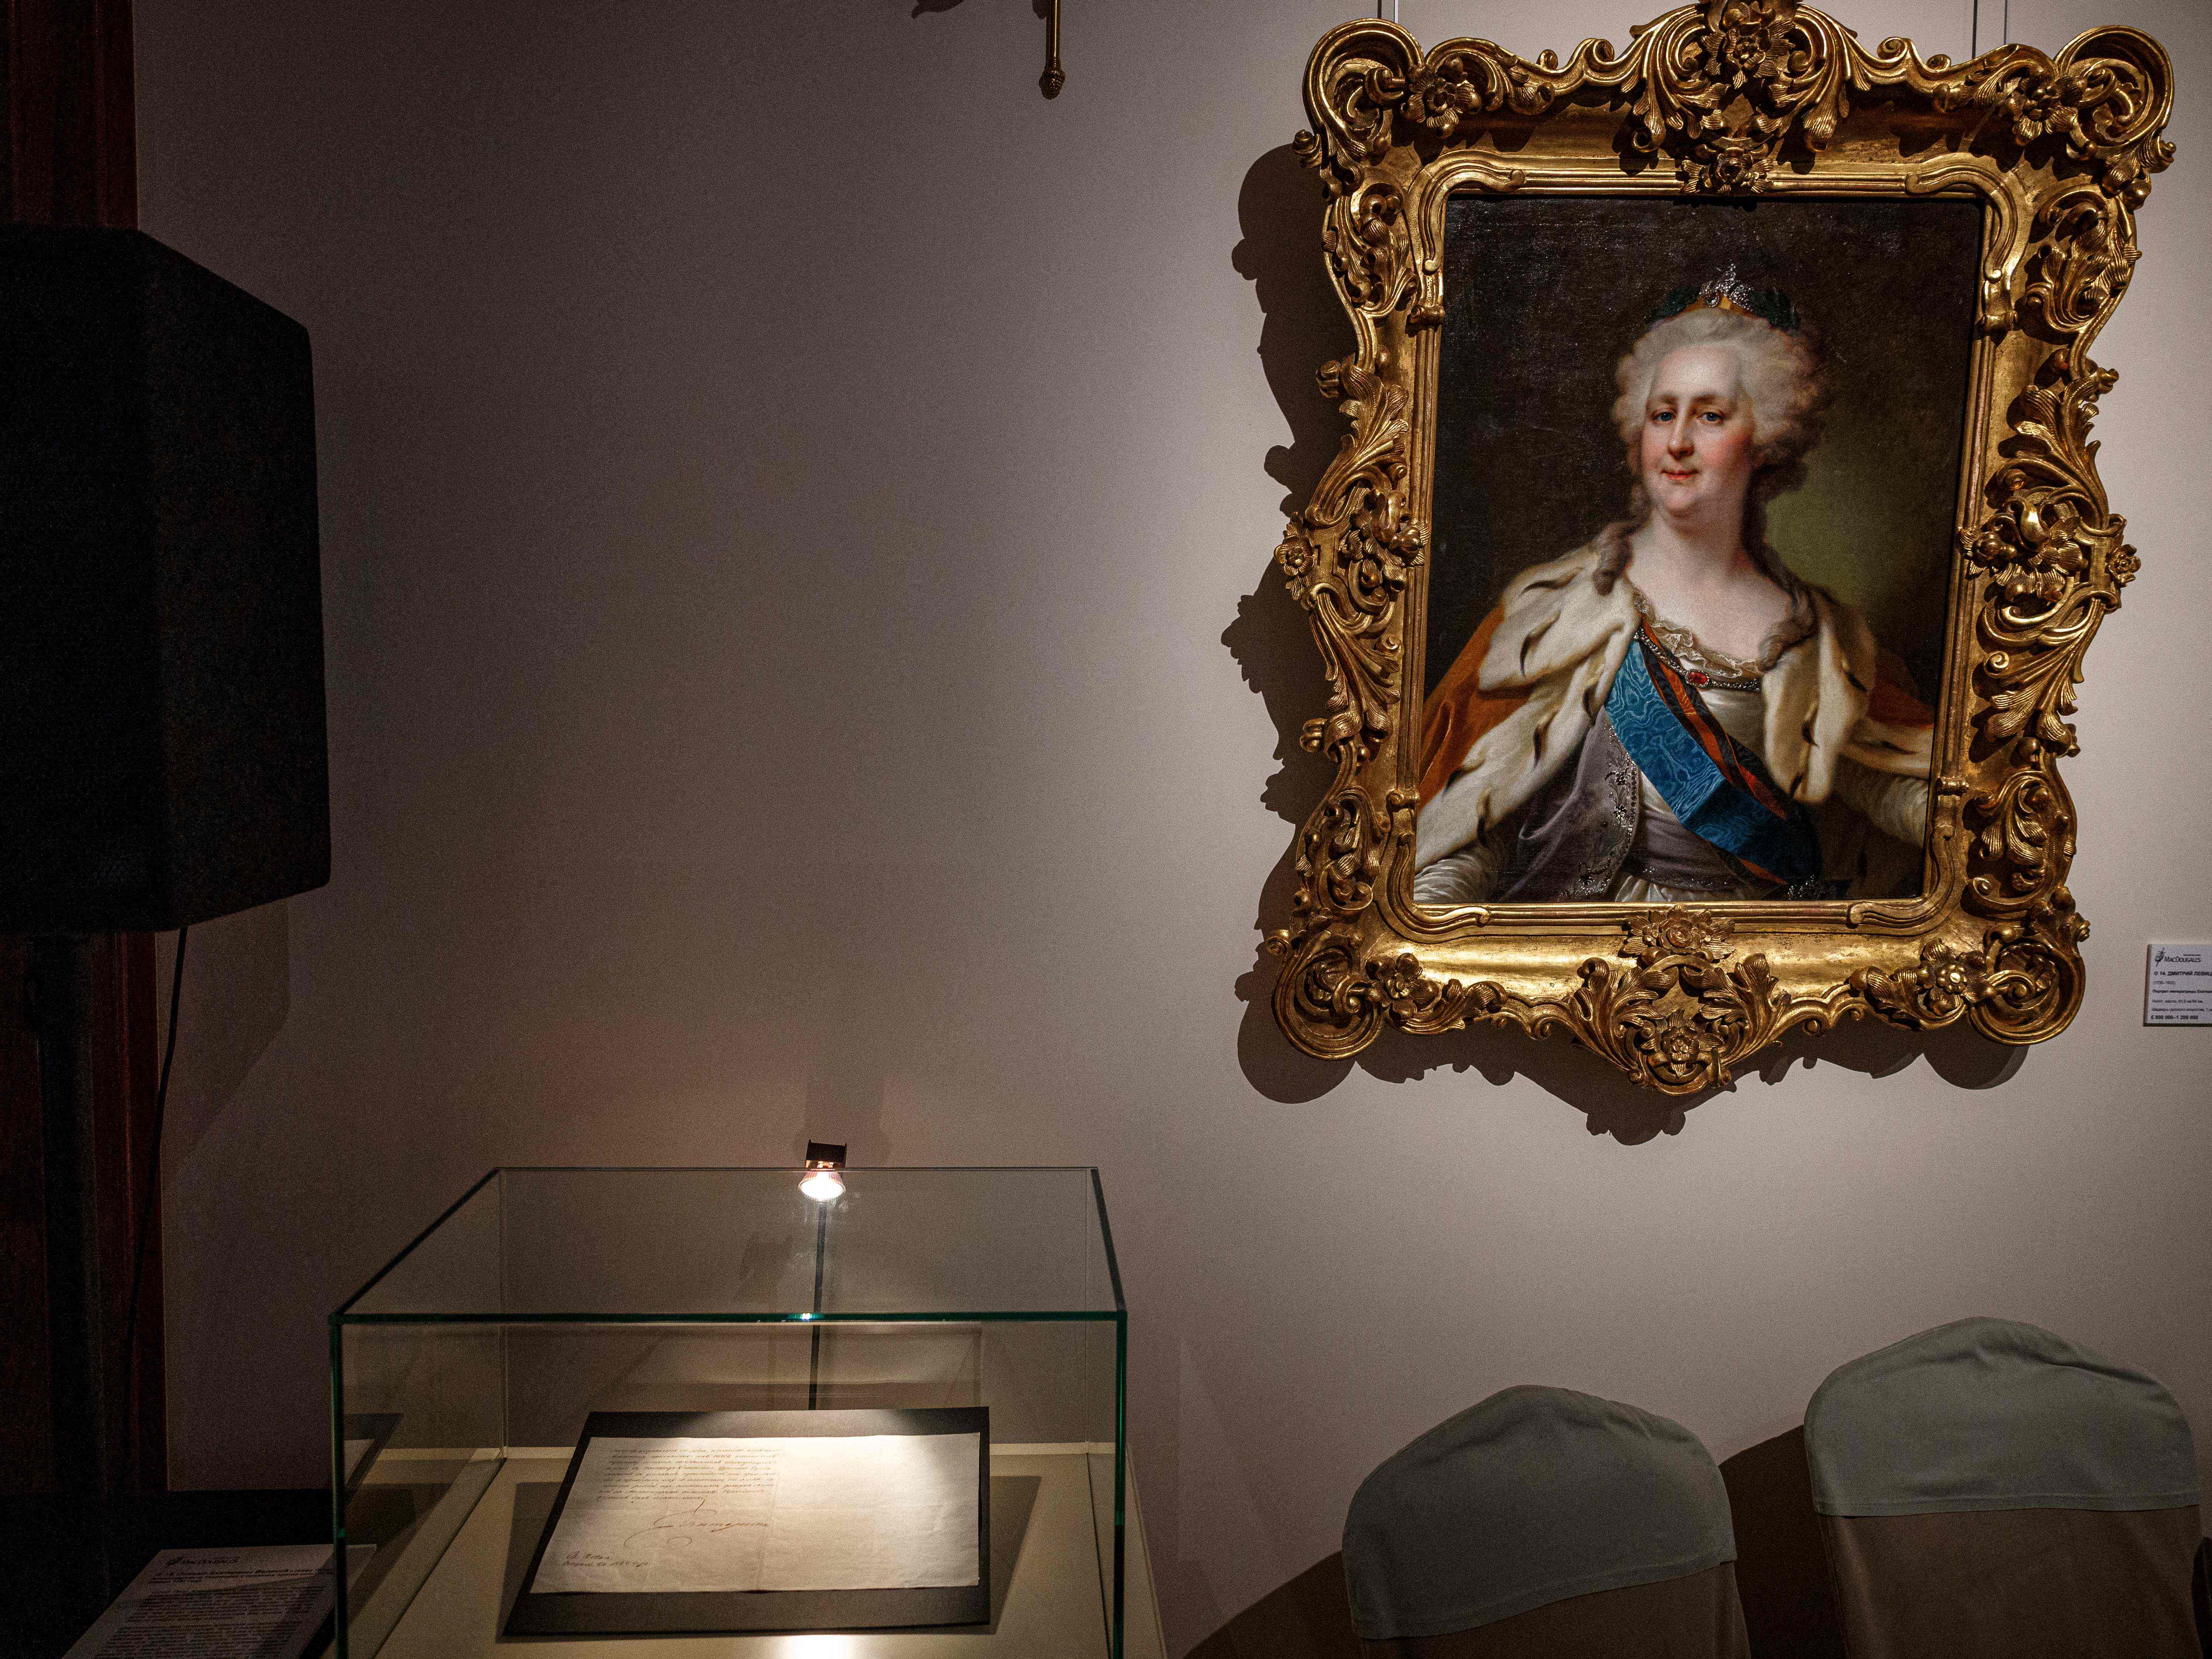 Catherine the Great’s letter supporting vaccinations is displayed in Moscow on 18 November